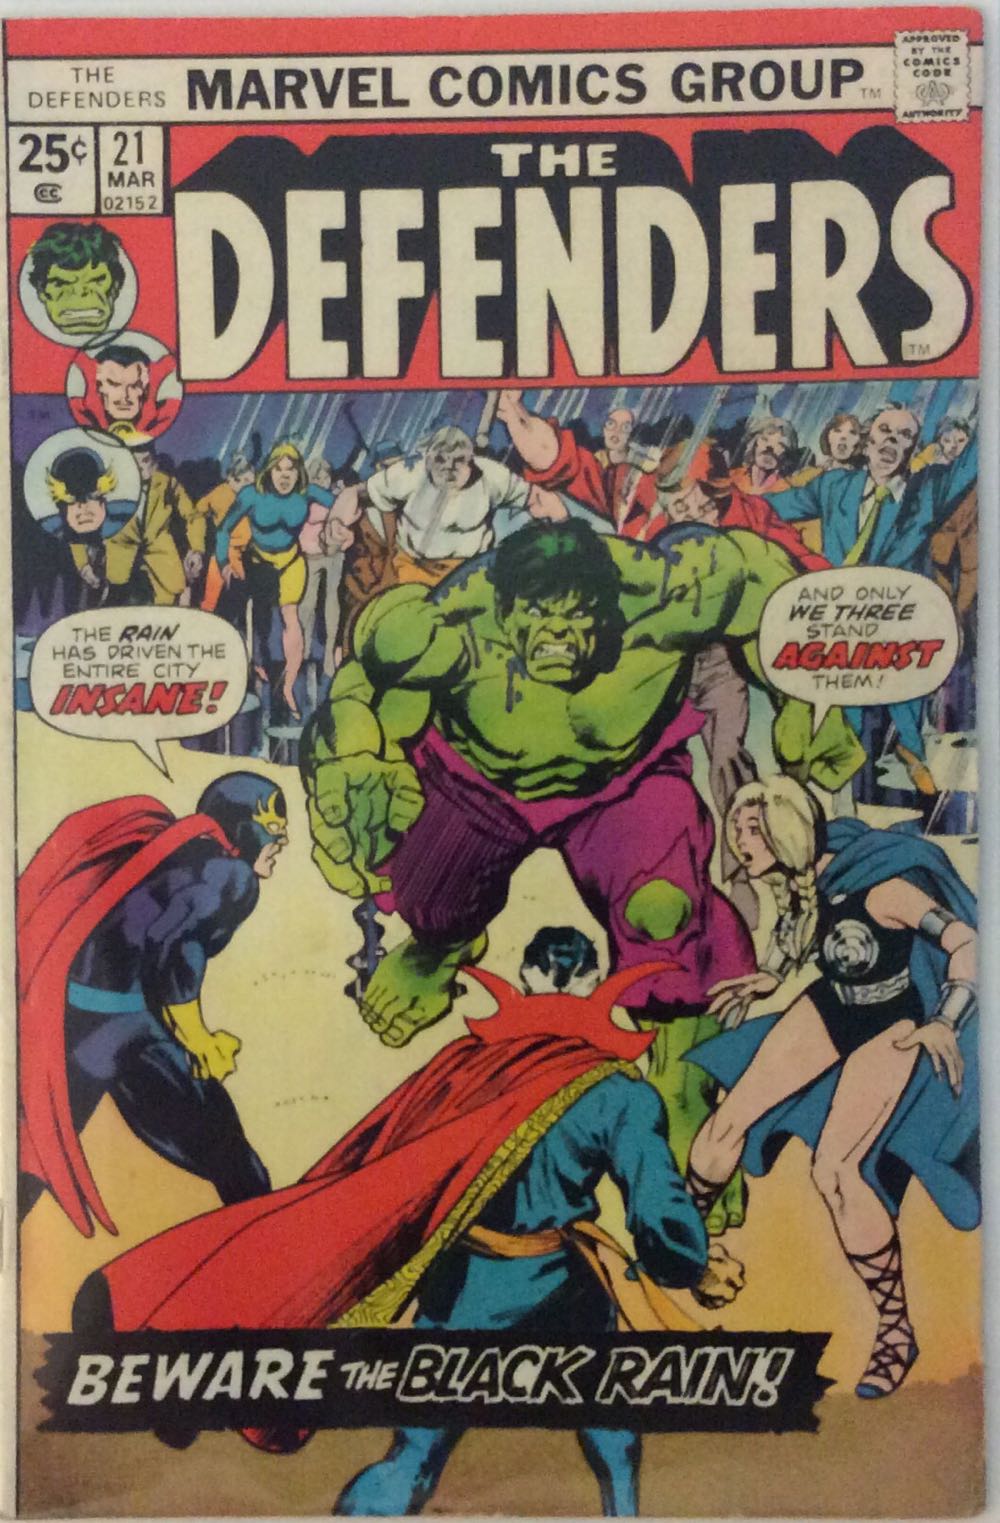 The Defenders - Marvel (21 - Mar 1975) comic book collectible - Main Image 2